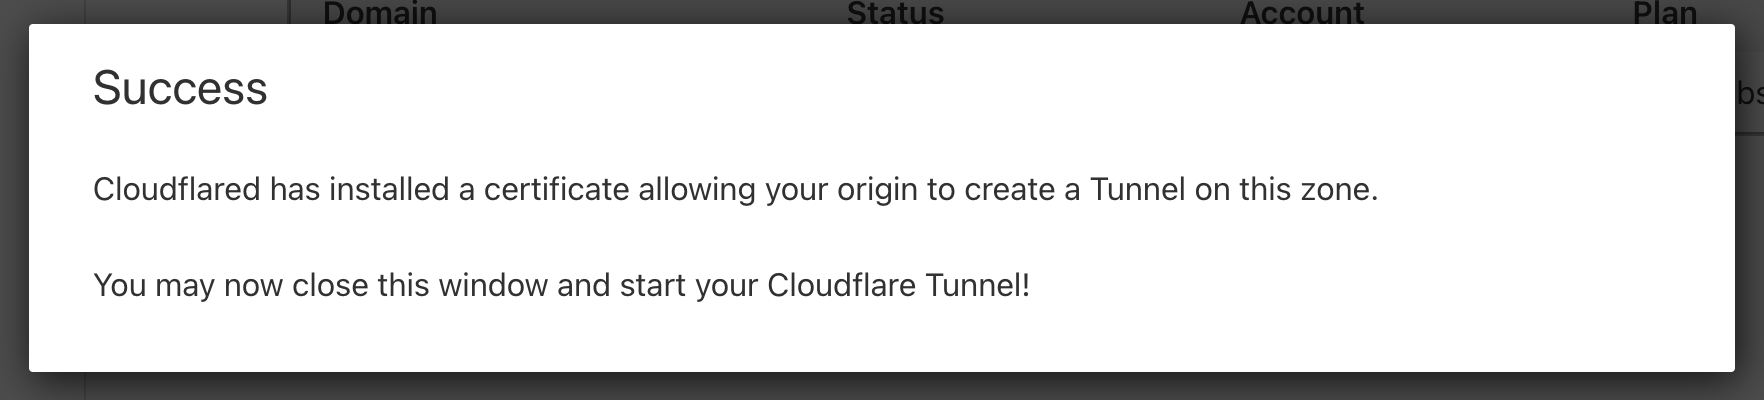 authorize Cloudflare Tunnel success